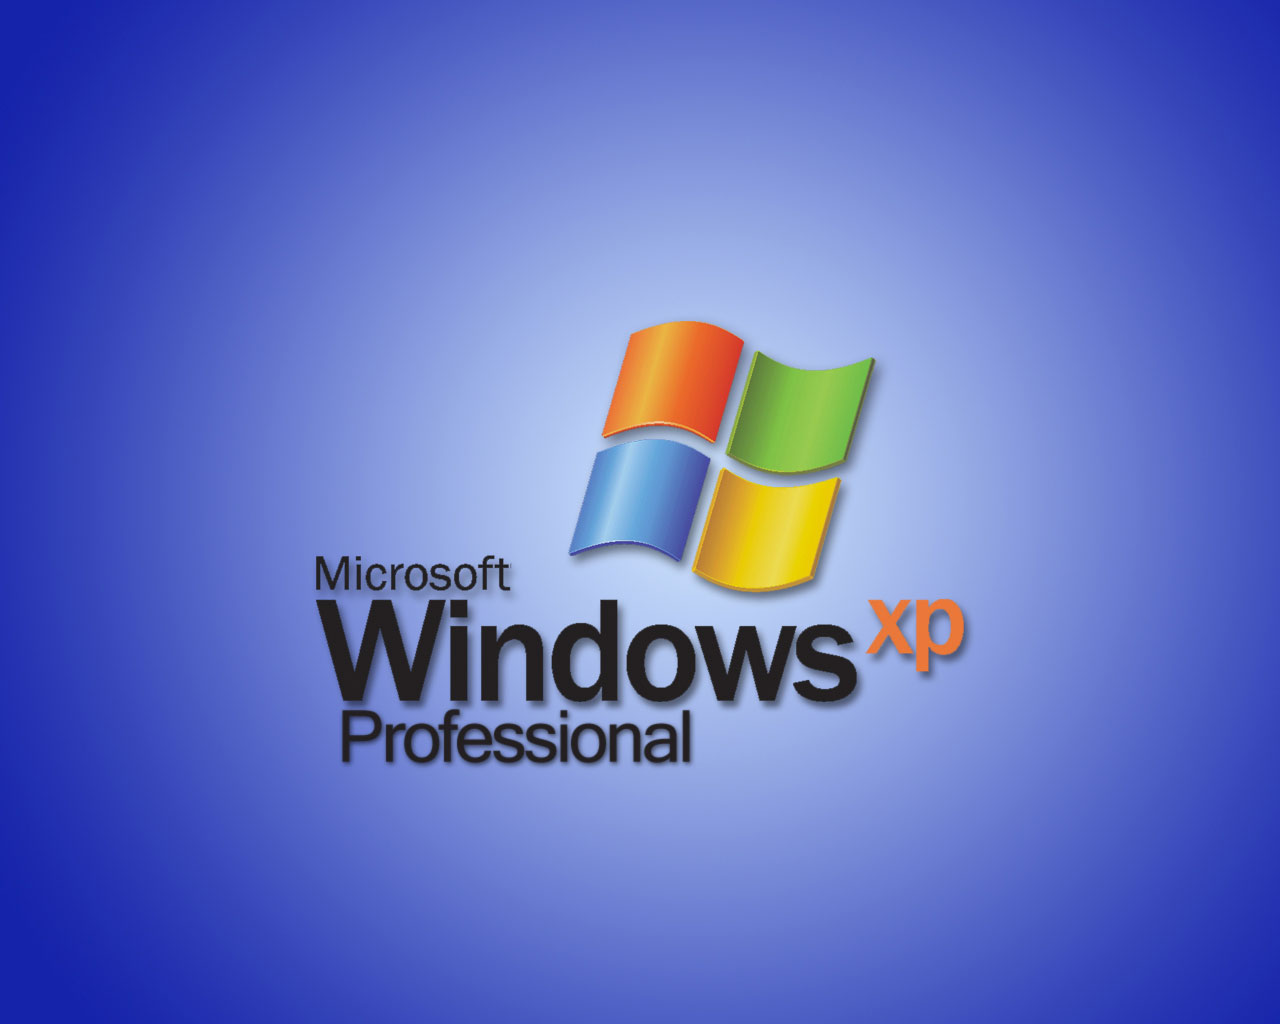 Windows xp professional corporate service pack 2 cd download